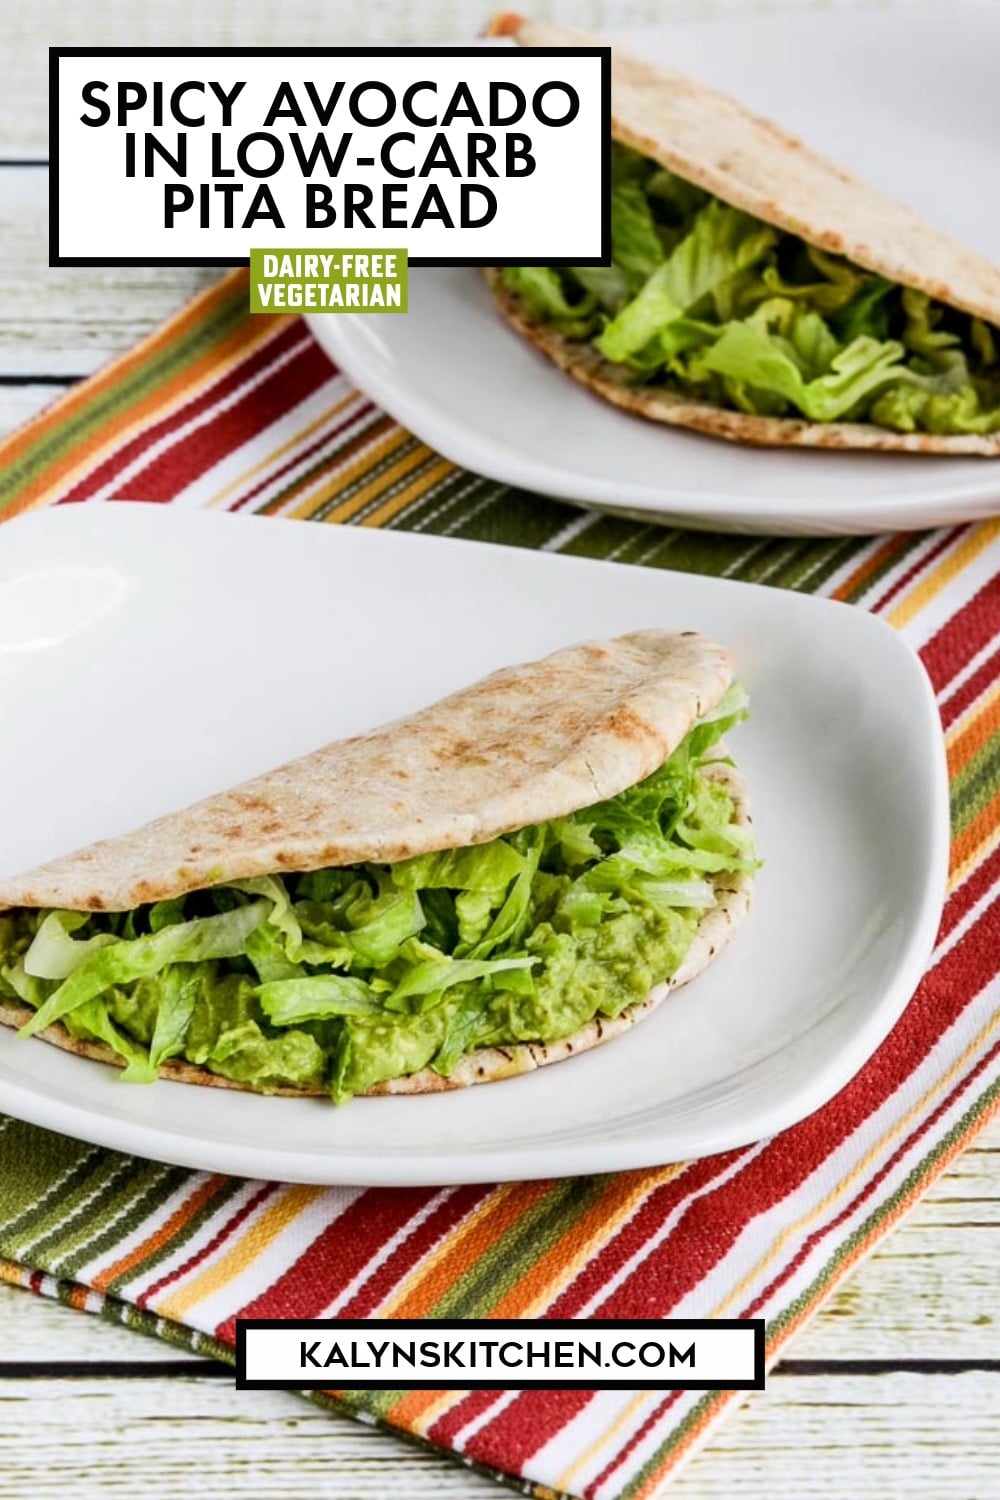 Pinterest image of Spicy Avocado in Low-Carb Pita Bread